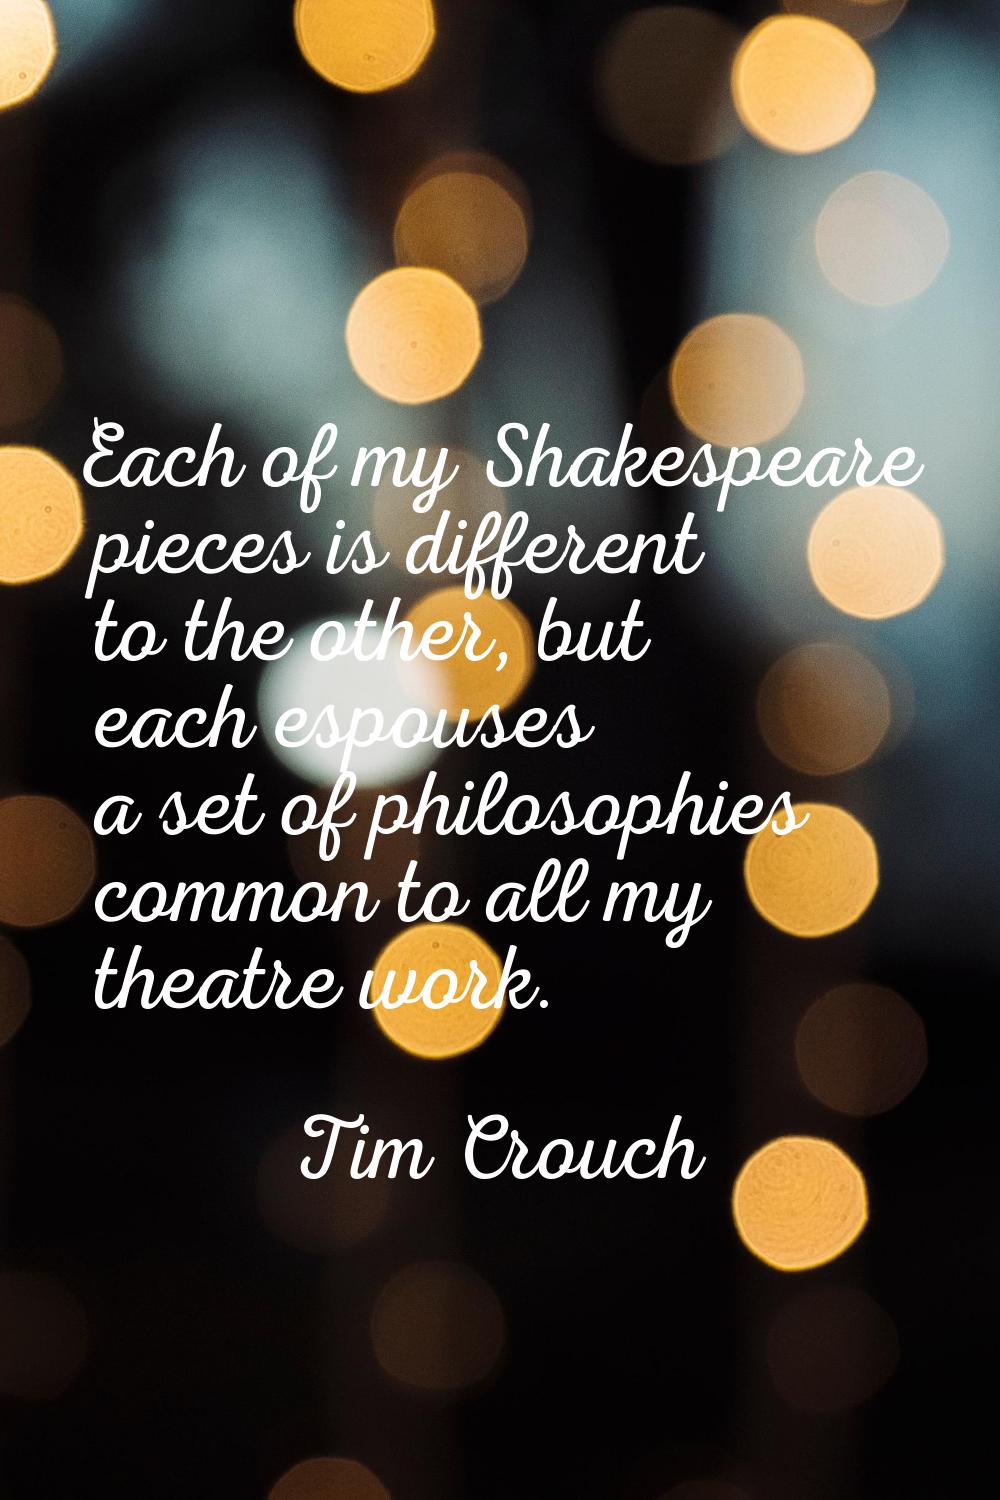 Each of my Shakespeare pieces is different to the other, but each espouses a set of philosophies co